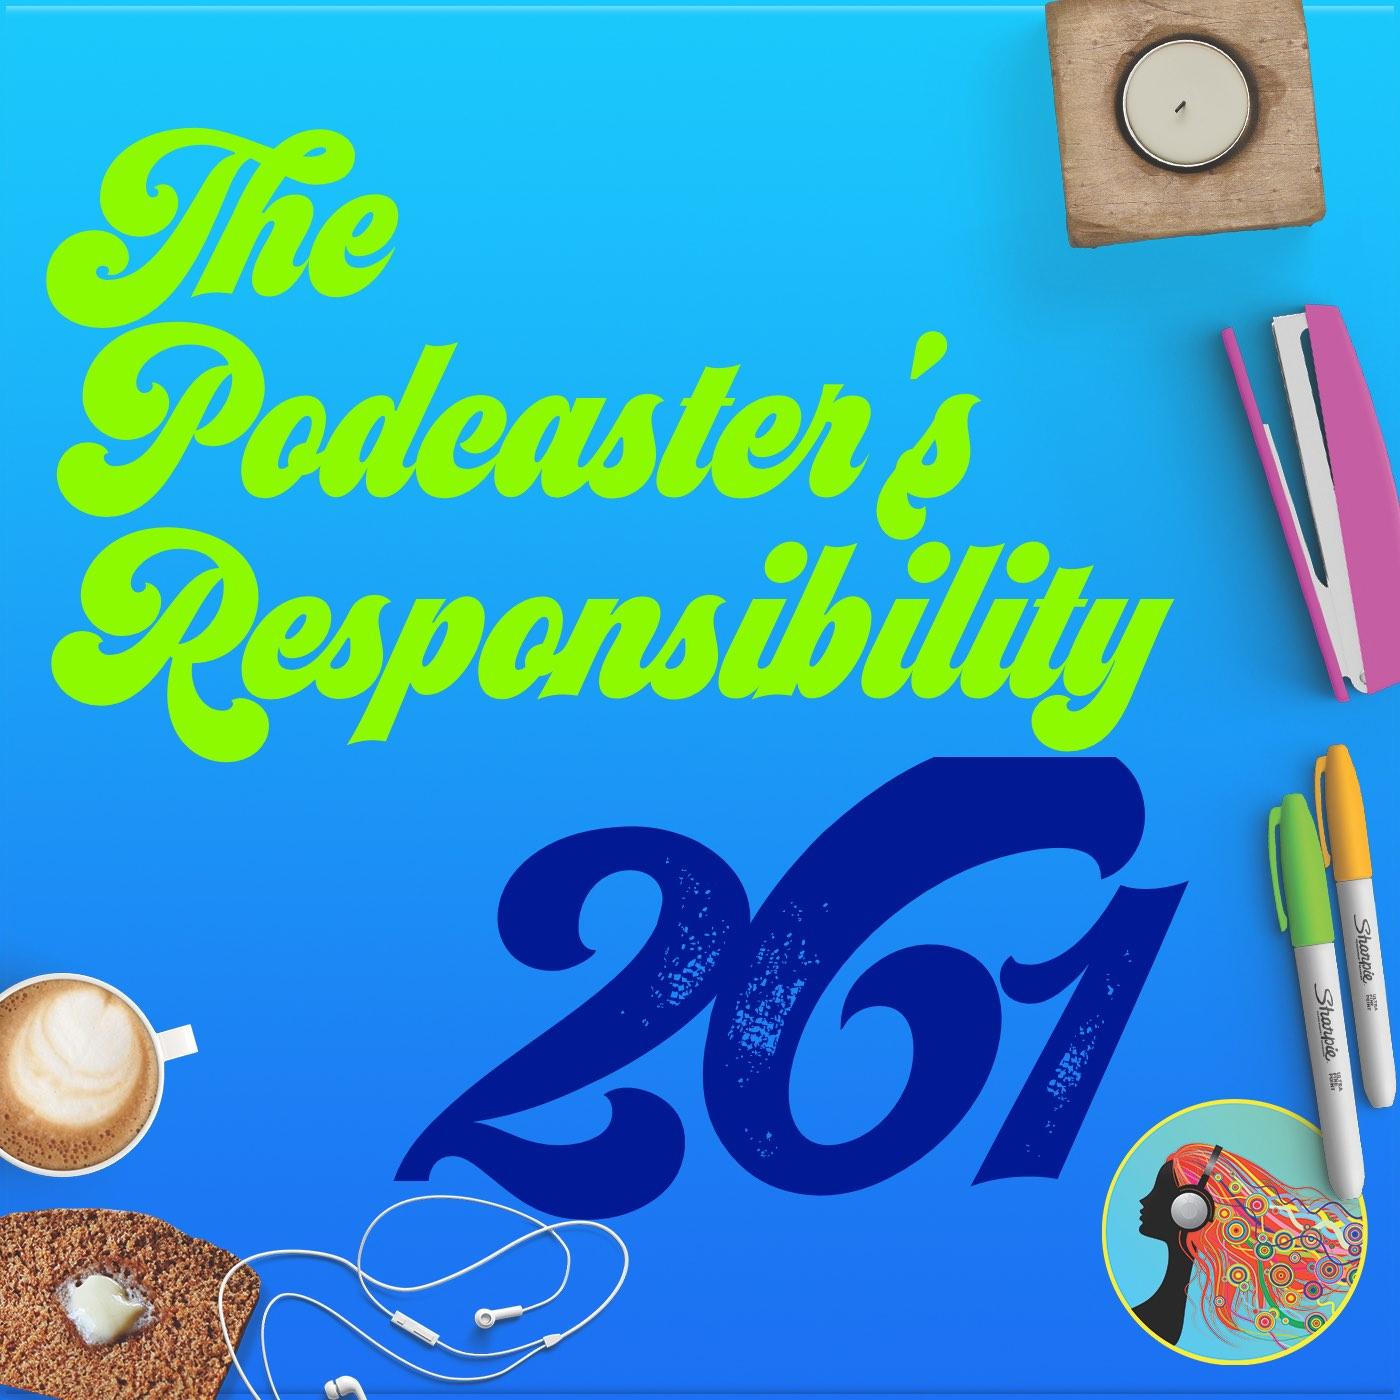 261 The Podcasters Responsibility